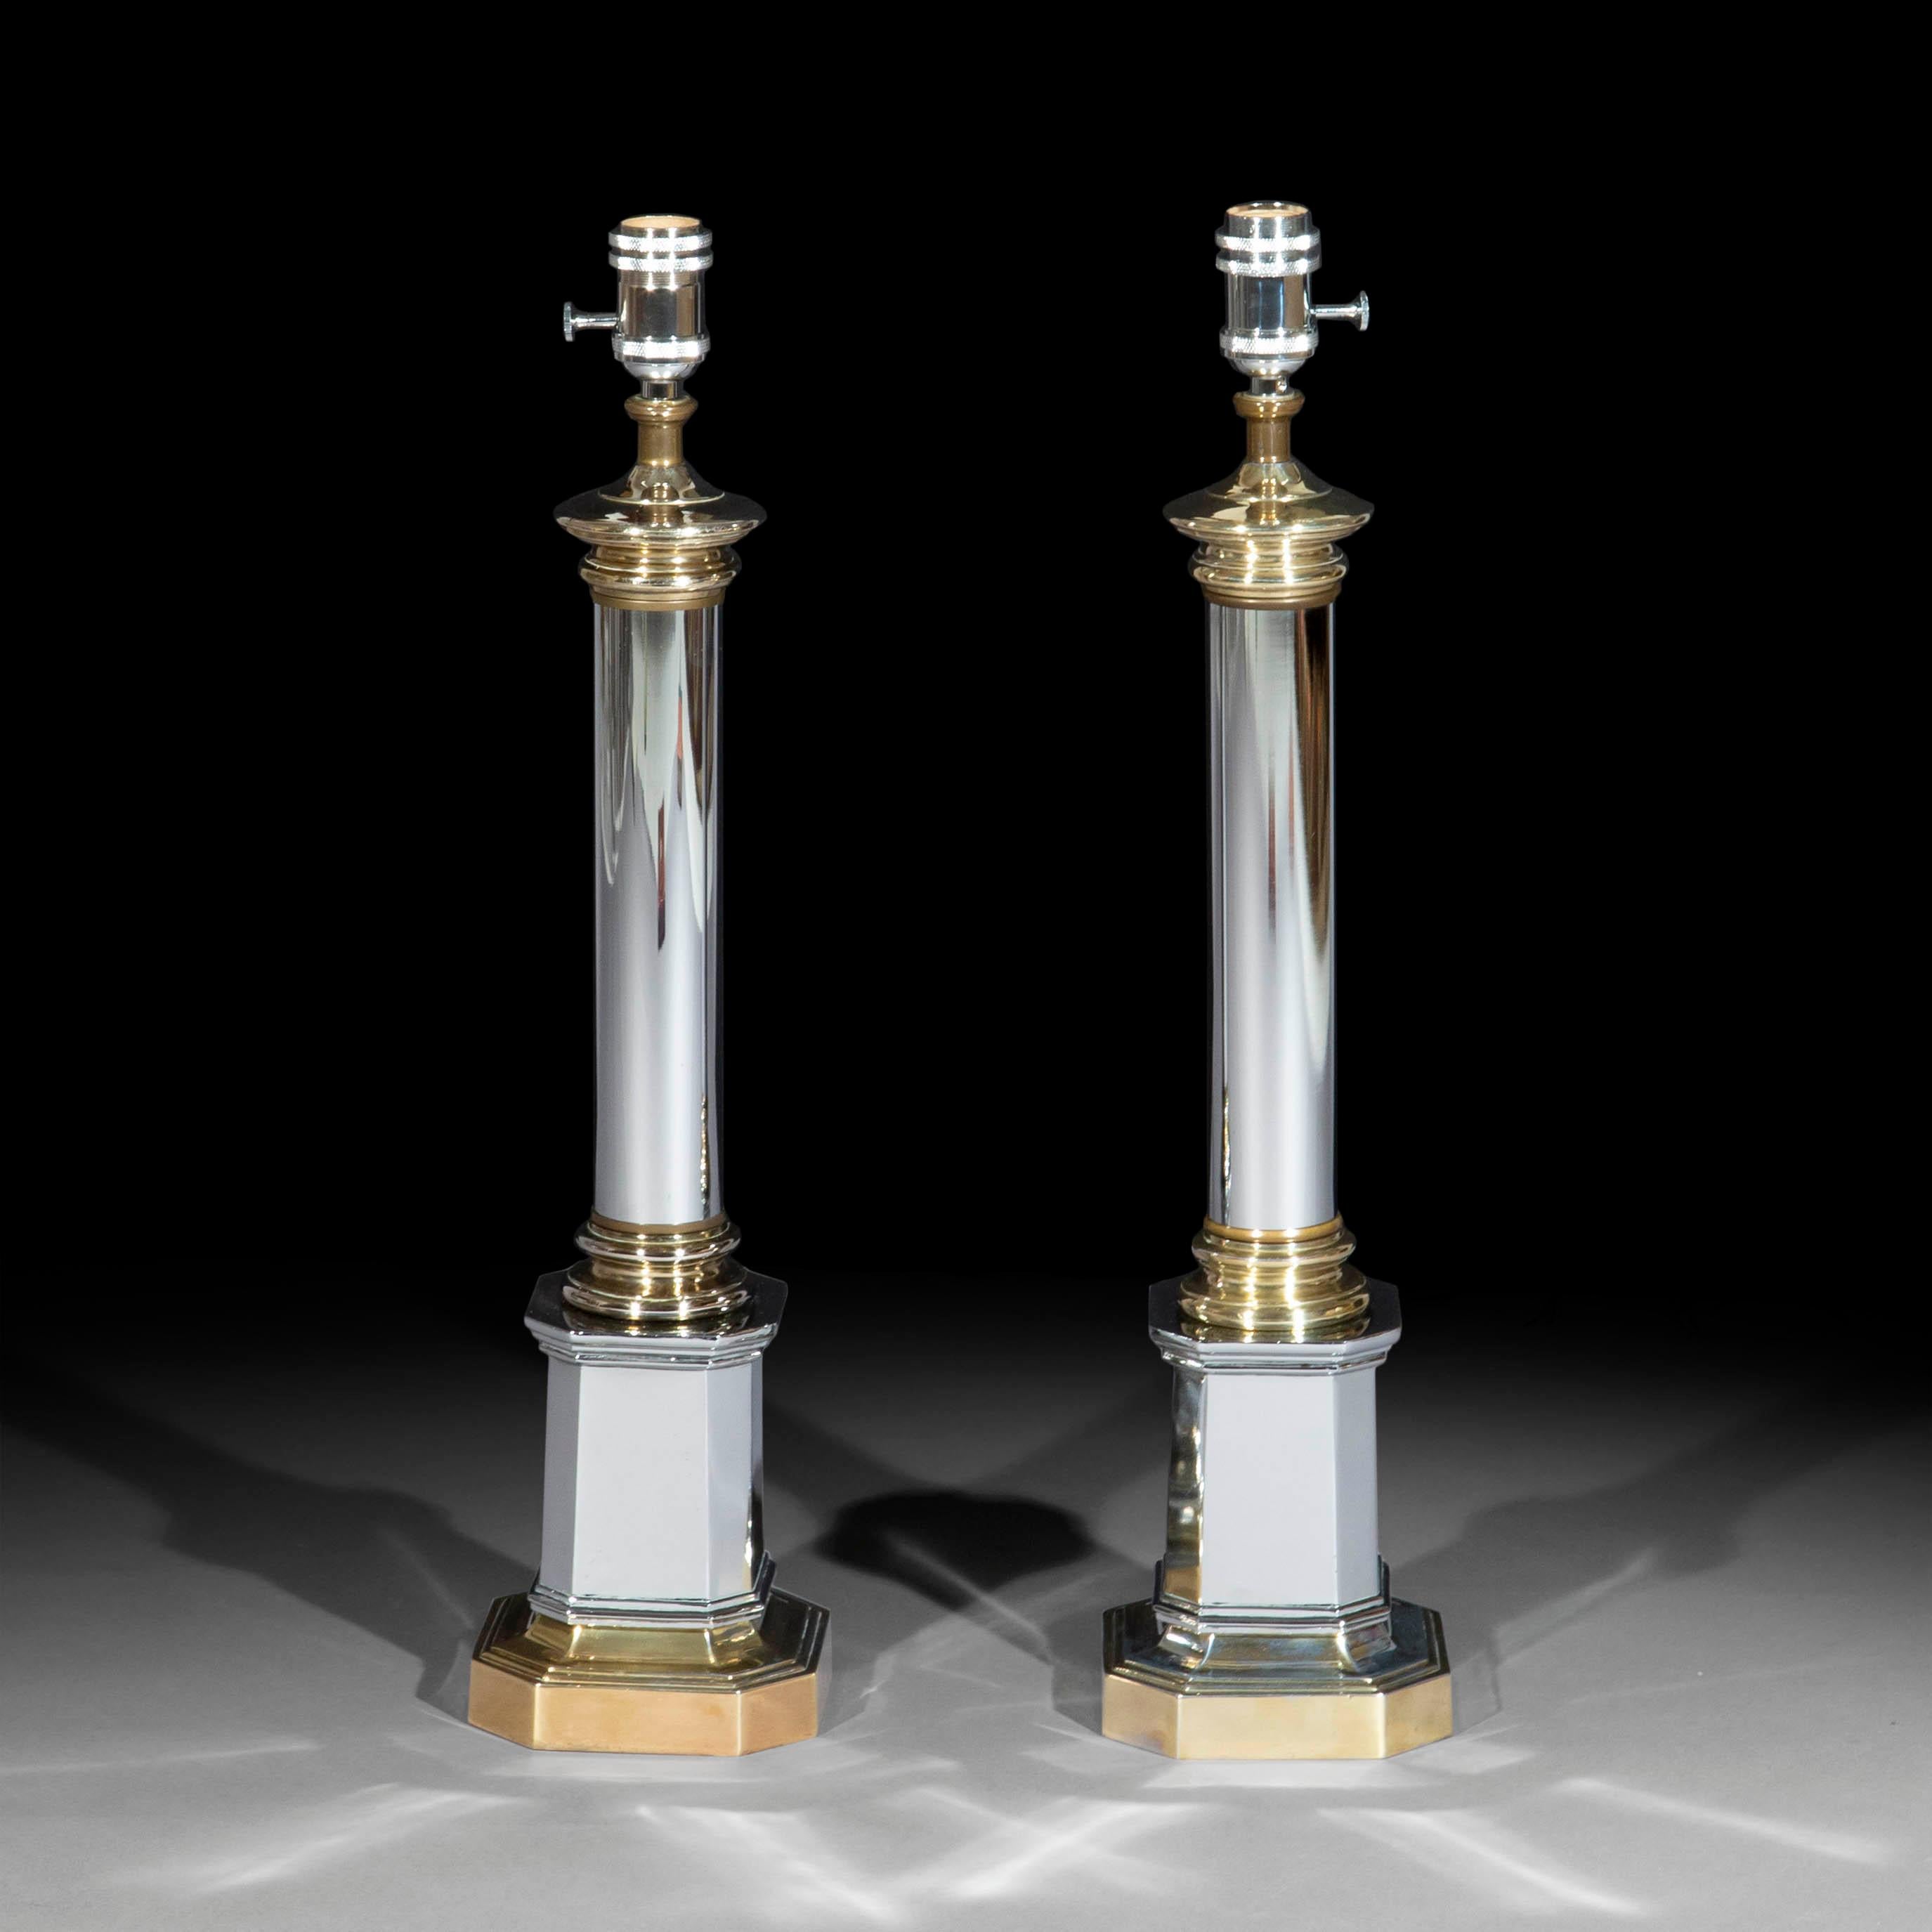 Hollywood Regency Pair of Art Deco Style Polished Chrome Table Lamps For Sale